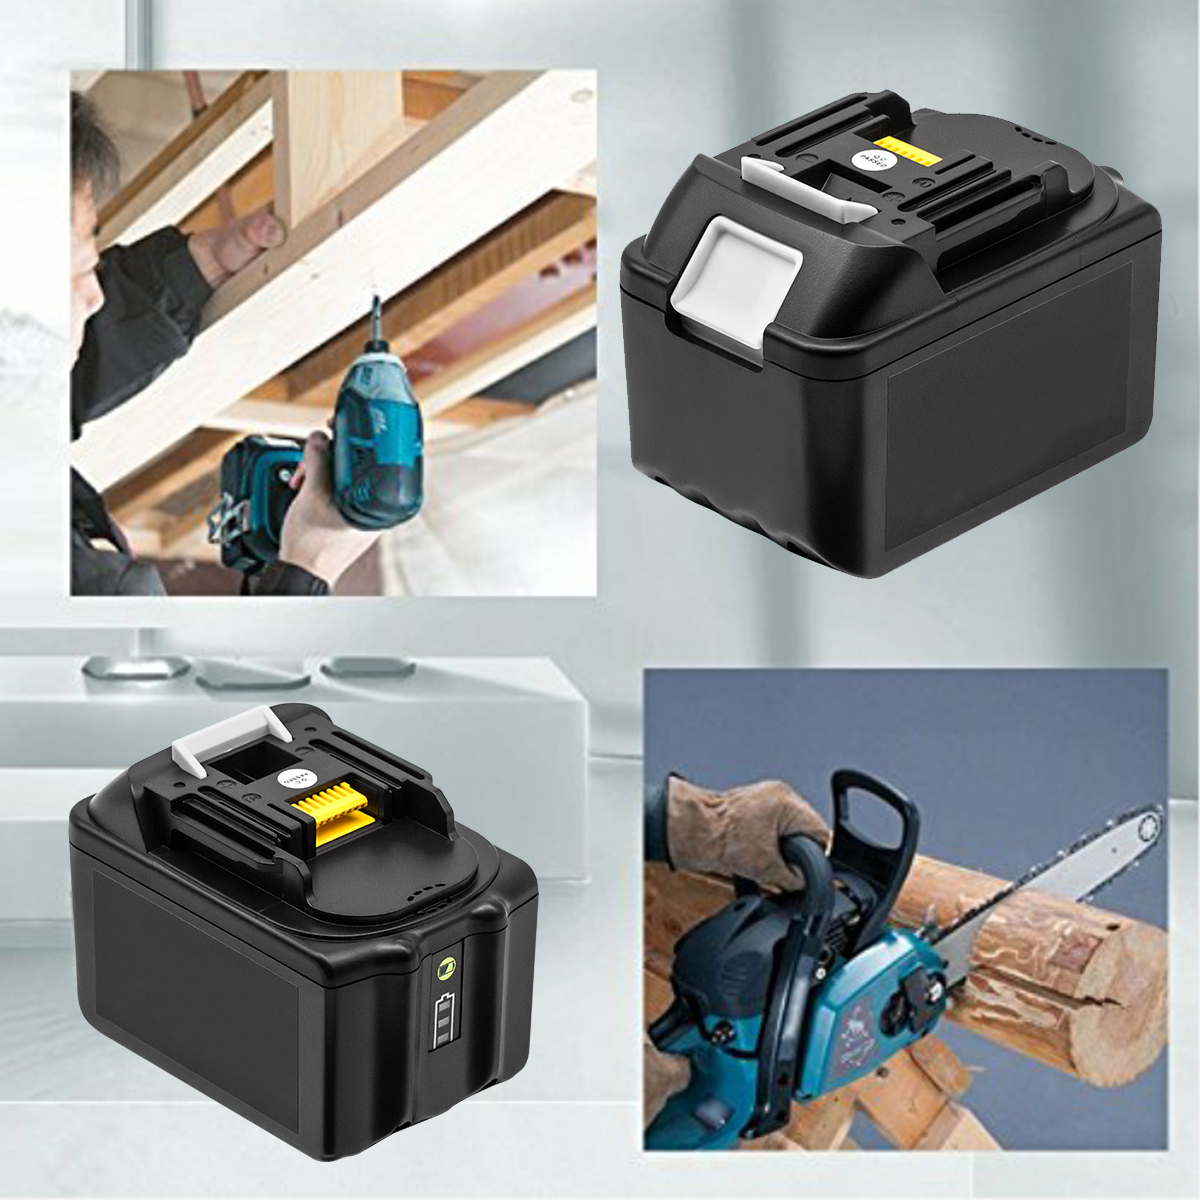 18V-90Ah-Power-Tool-Battery-Replacement-For-Makita-BL1860-BL1850-BL1840-BL1830-BL1845-194205-3-19430-1668187-7